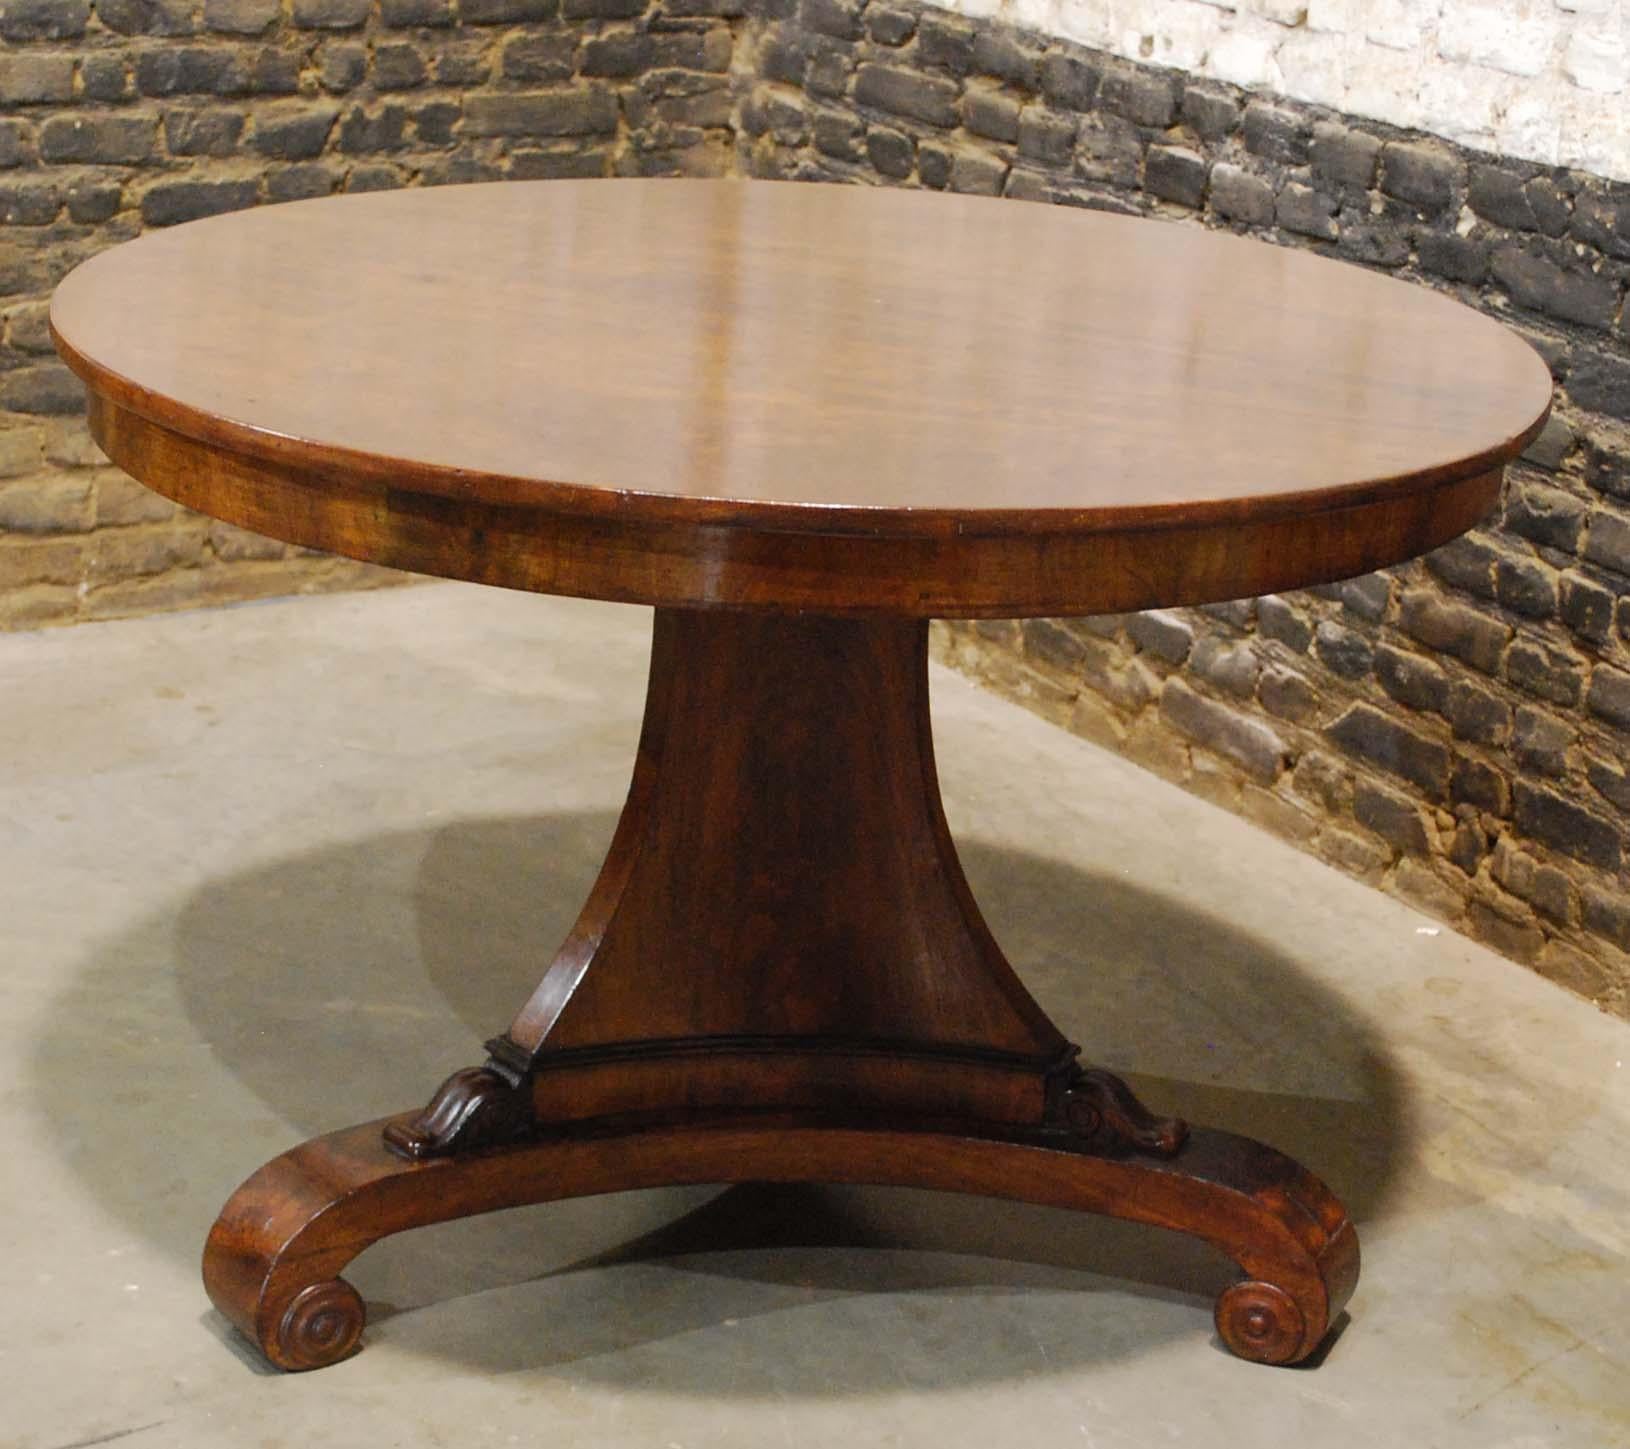 Polished Antique 19th Century Empire Dutch Mahogany Round Dining Table